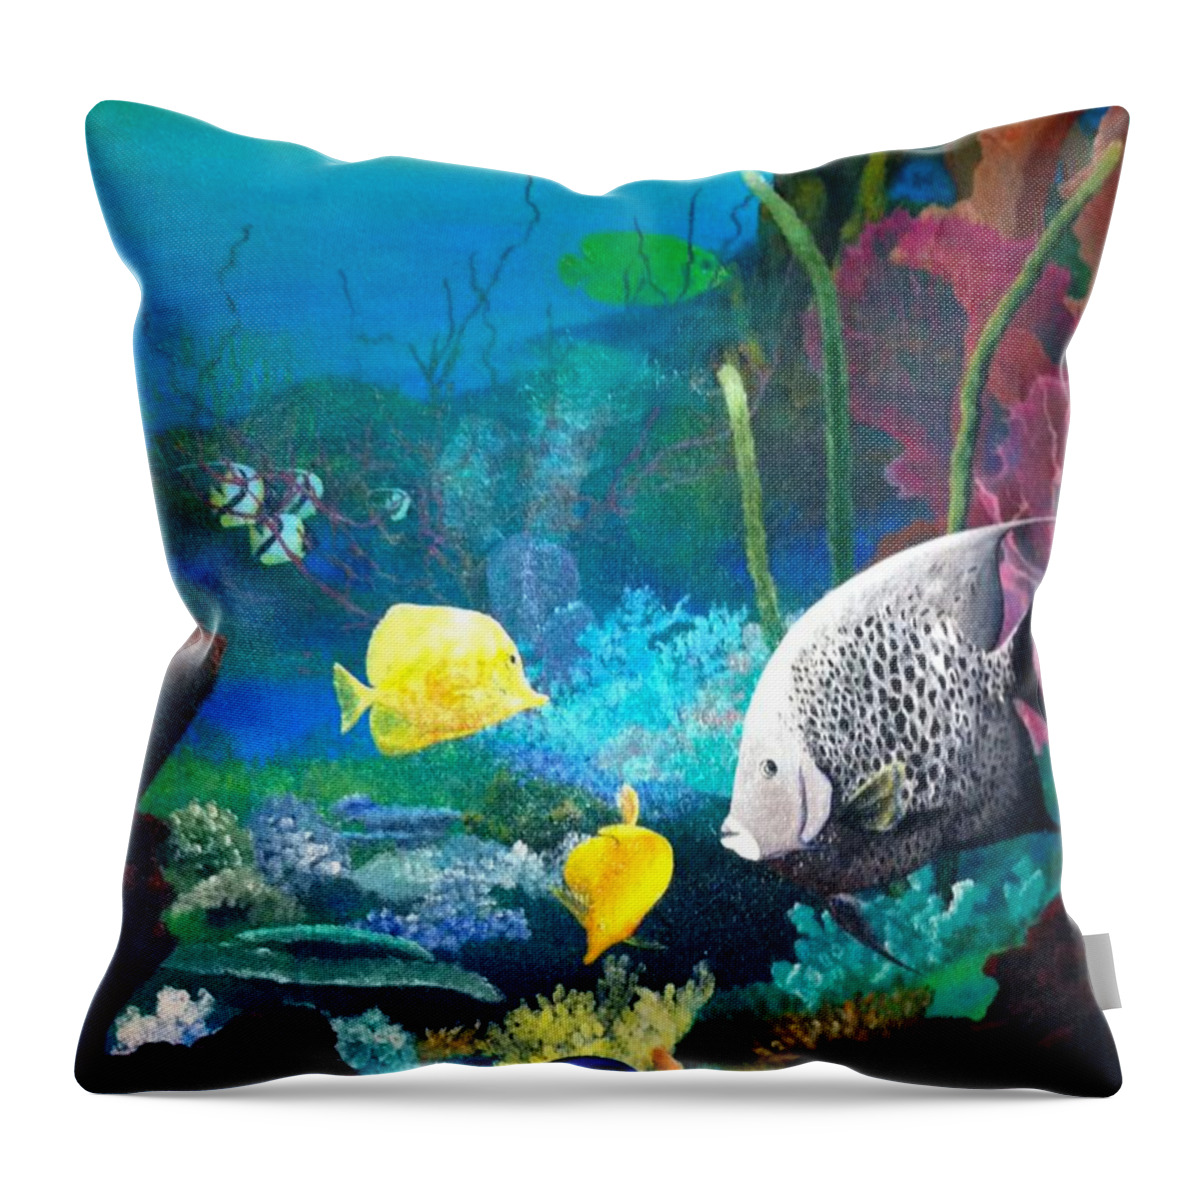 Queen Angel Throw Pillow featuring the painting Fragile Castles by Patti Lane